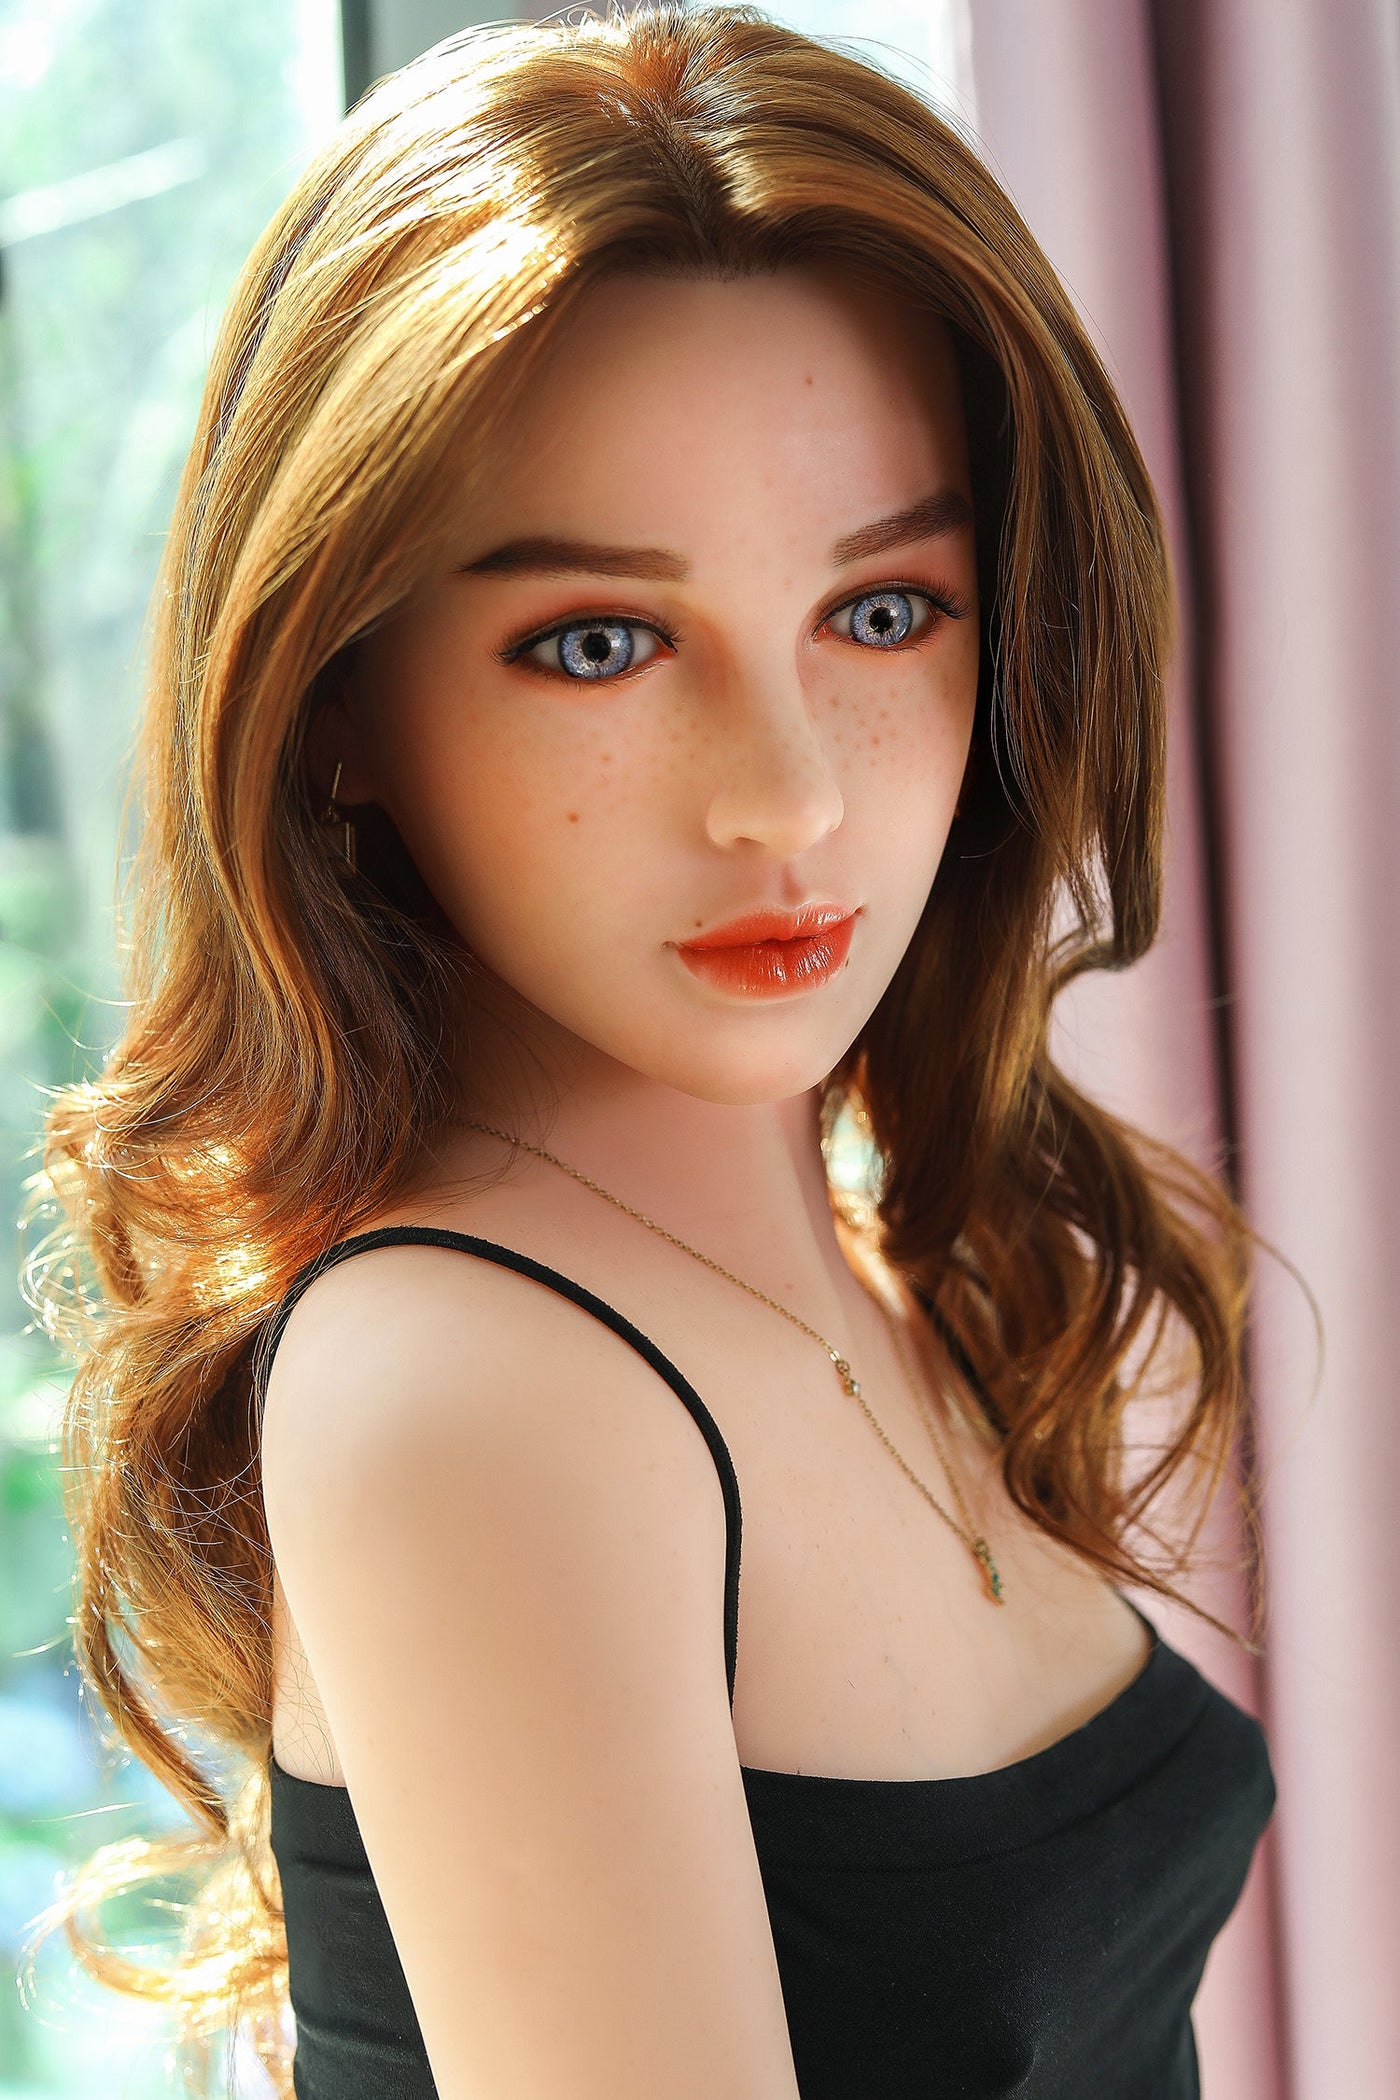 US Stock - Ridmii Jessica 159cm #263 A Cup Small Breast Adult Love Doll Realistic Sex Doll - 159CM, US Stock - SexDollPartner